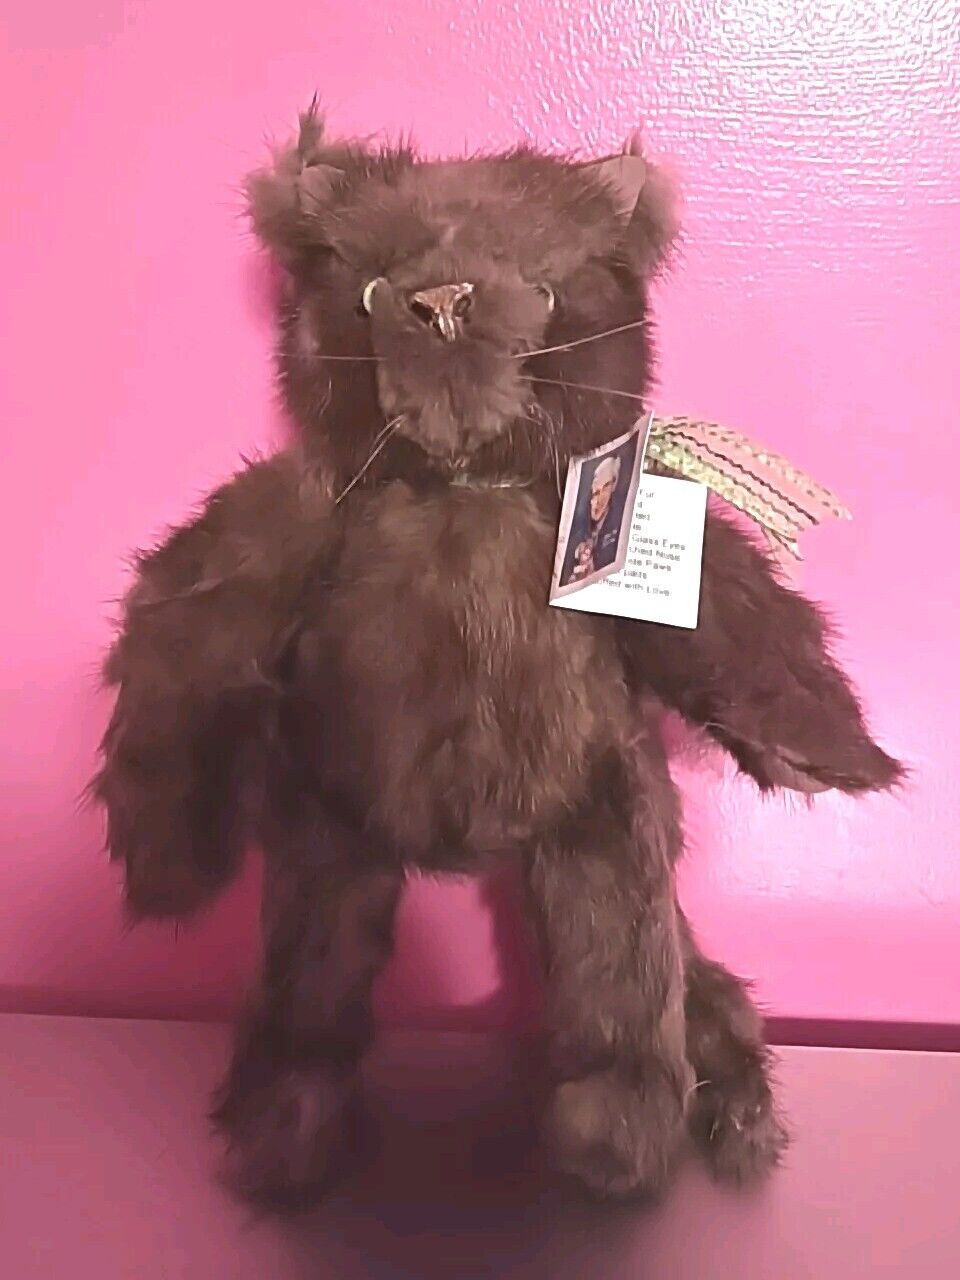 PRFect Pals Hand Made Cat Recycled Materials Jointed 14 Inches Tall